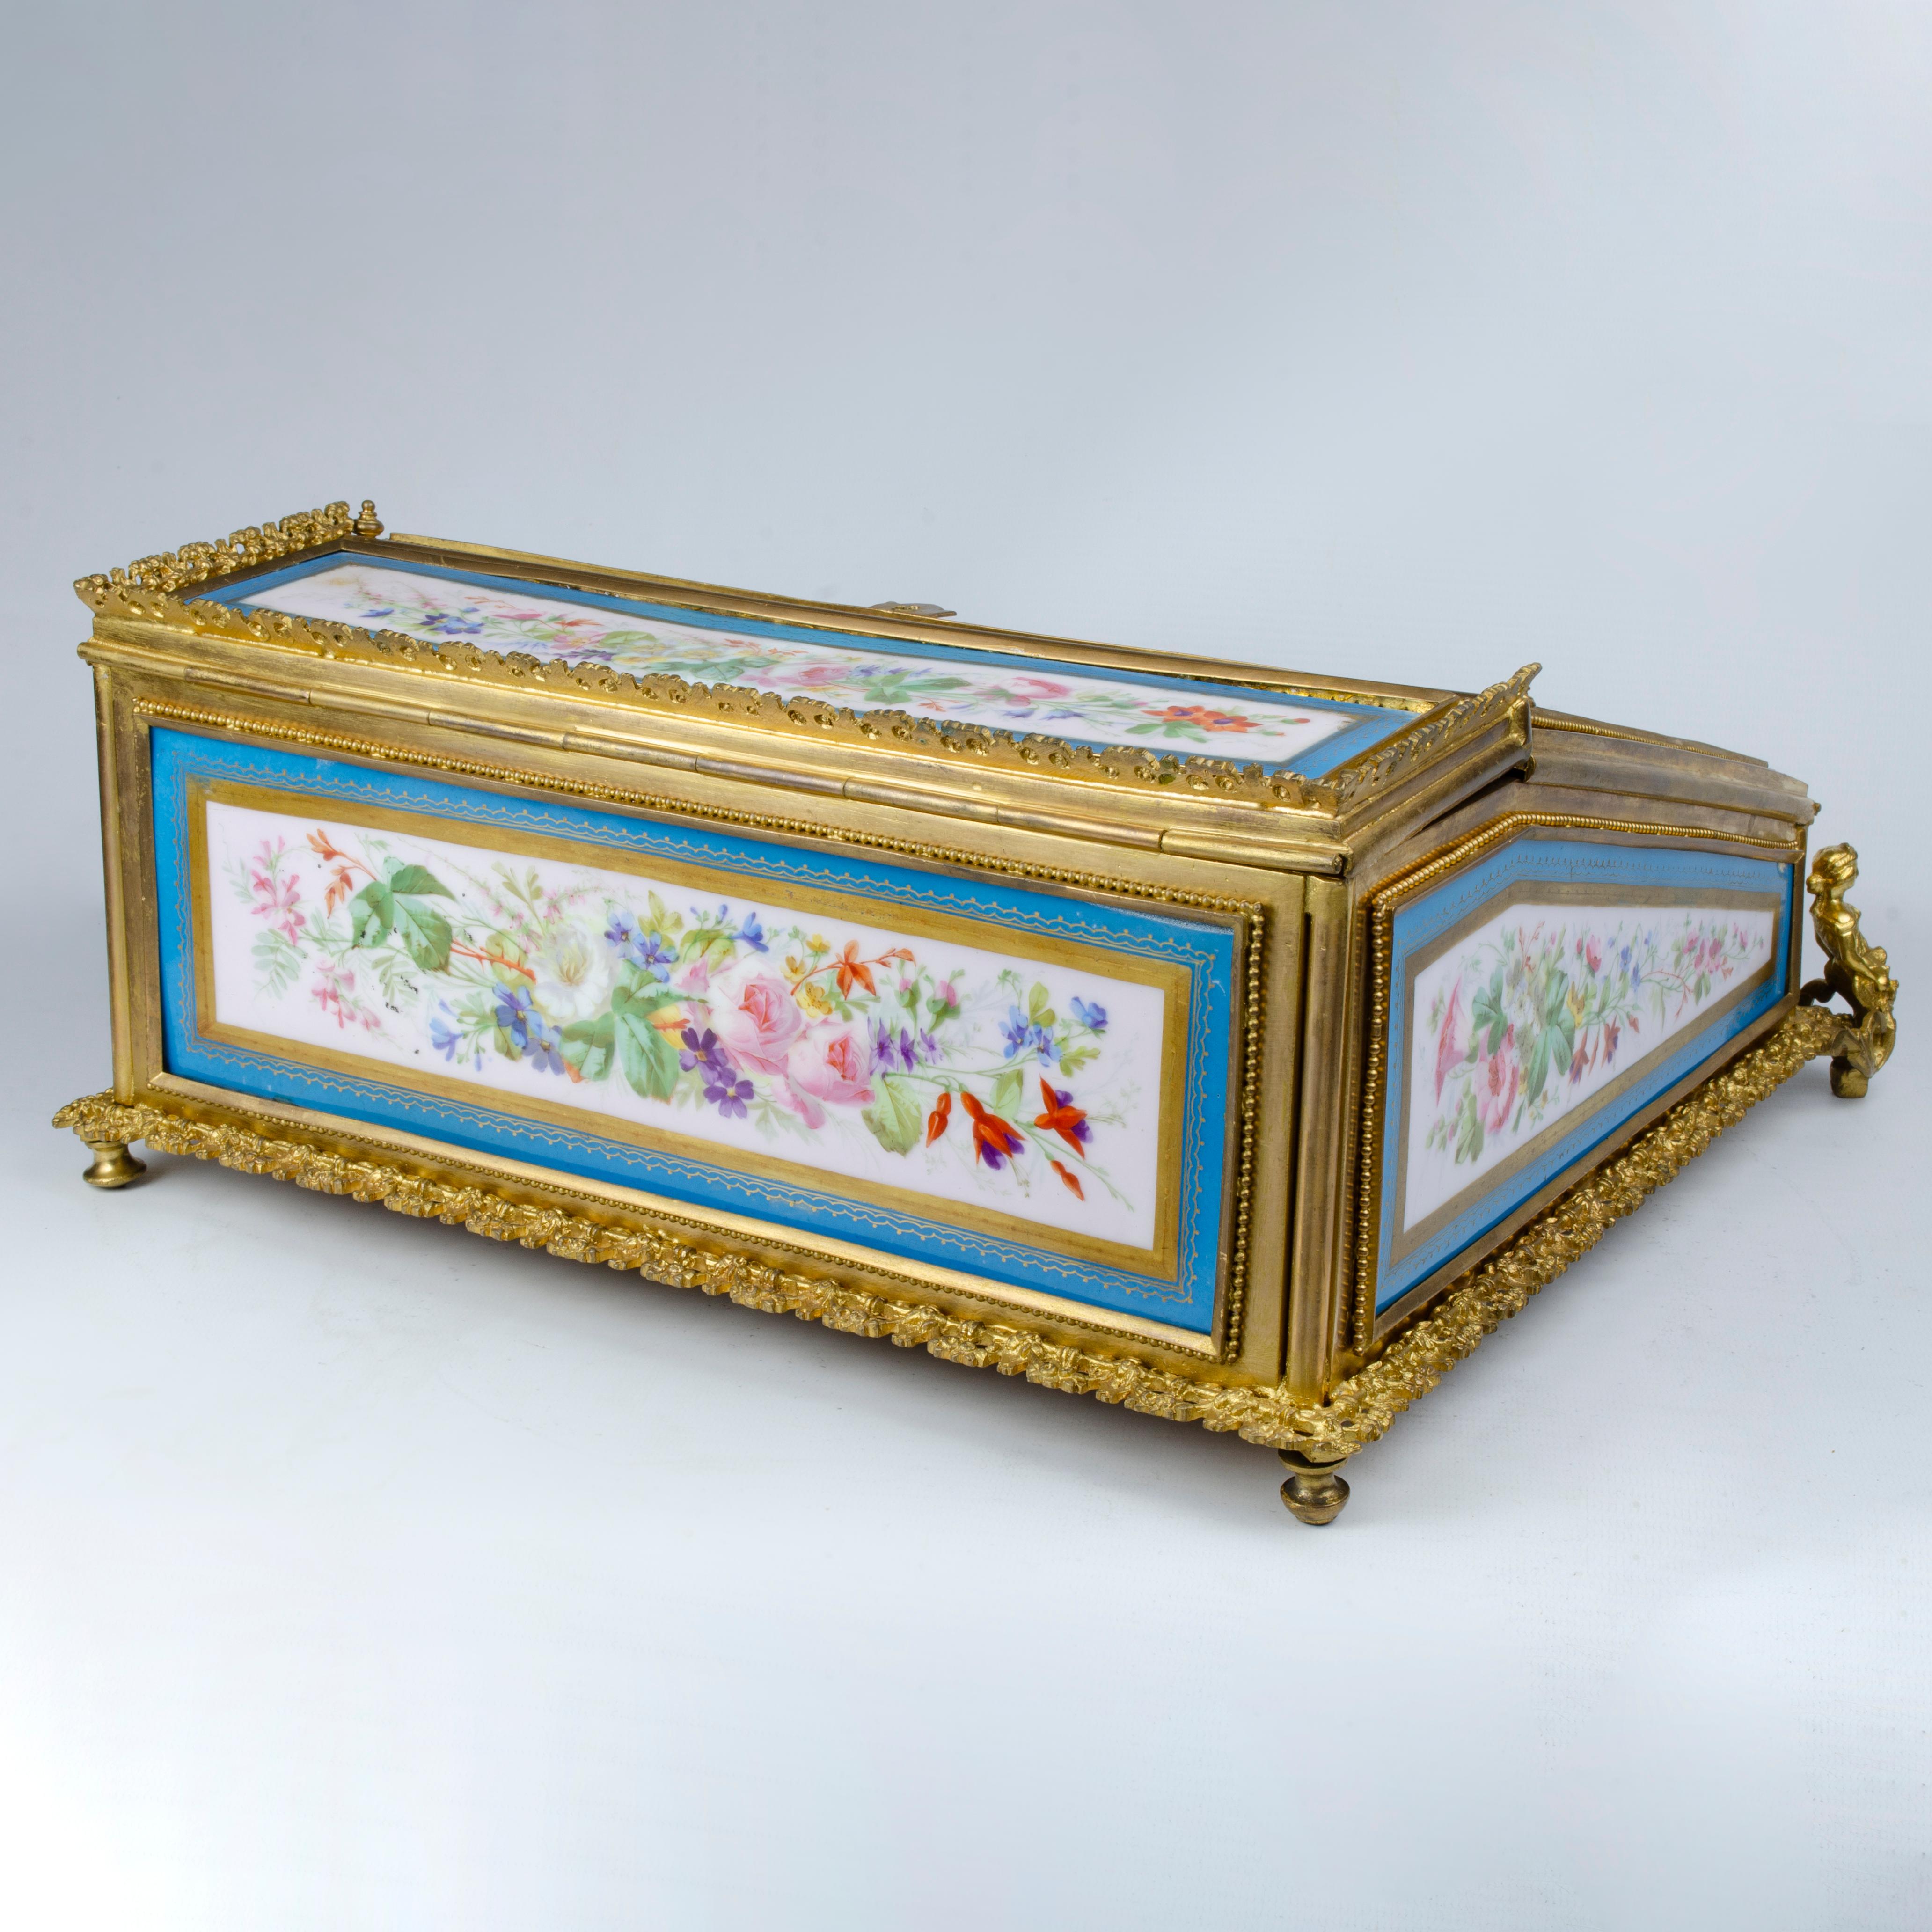 Travel desk made with Sevres style porcelain plates, with mercury gold plated bronze mount. The piece is in a late 19th century Napoleon III style.
The upper part is inclined and has a painting with a design corresponding to a period after the